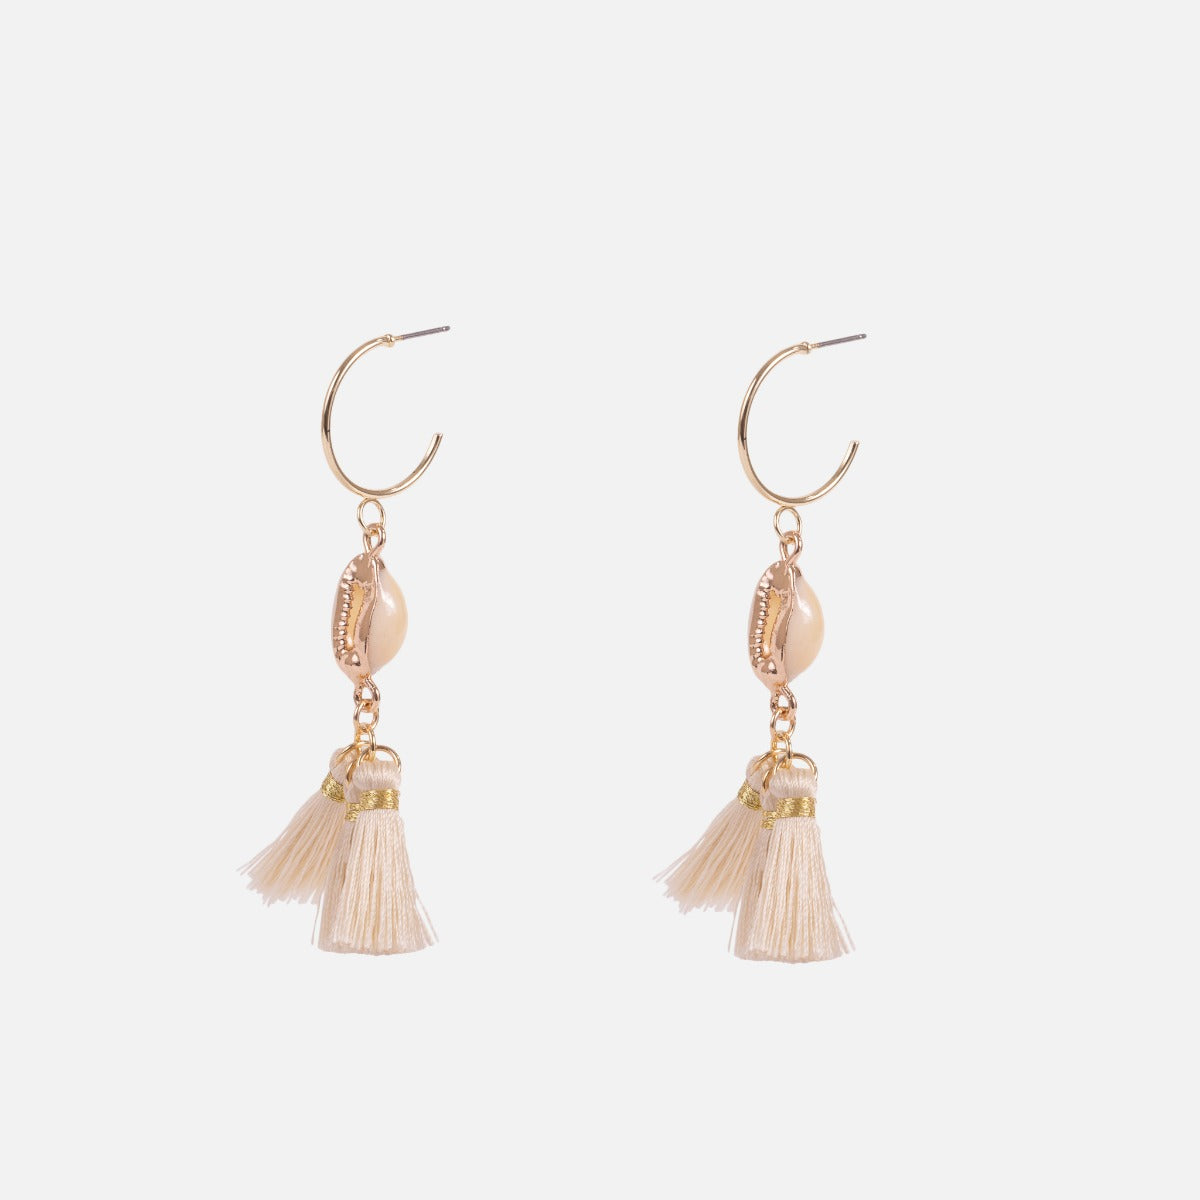 Earrings with shell and tassels